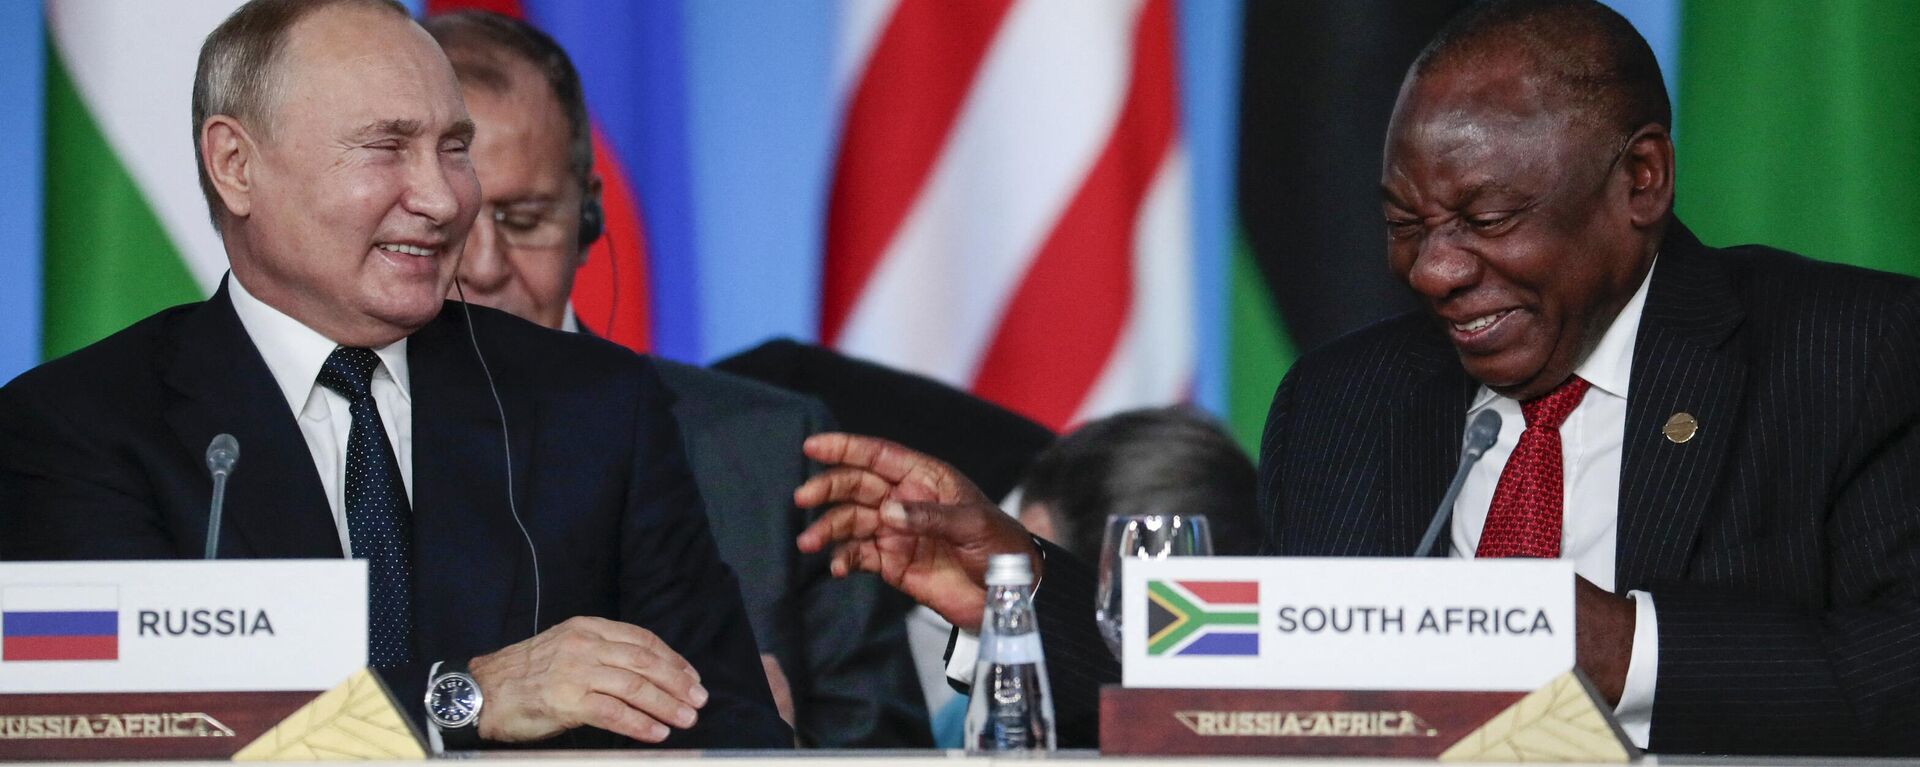 South-Africa's President Cyril Ramaphosa (L) and Russia's President Vladimir Putin (R) attend the first plenary session as part of the 2019 Russia-Africa Summit at the Sirius Park of Science and Art in Sochi, Russia, on October 24, 2019 - Sputnik Africa, 1920, 08.04.2023